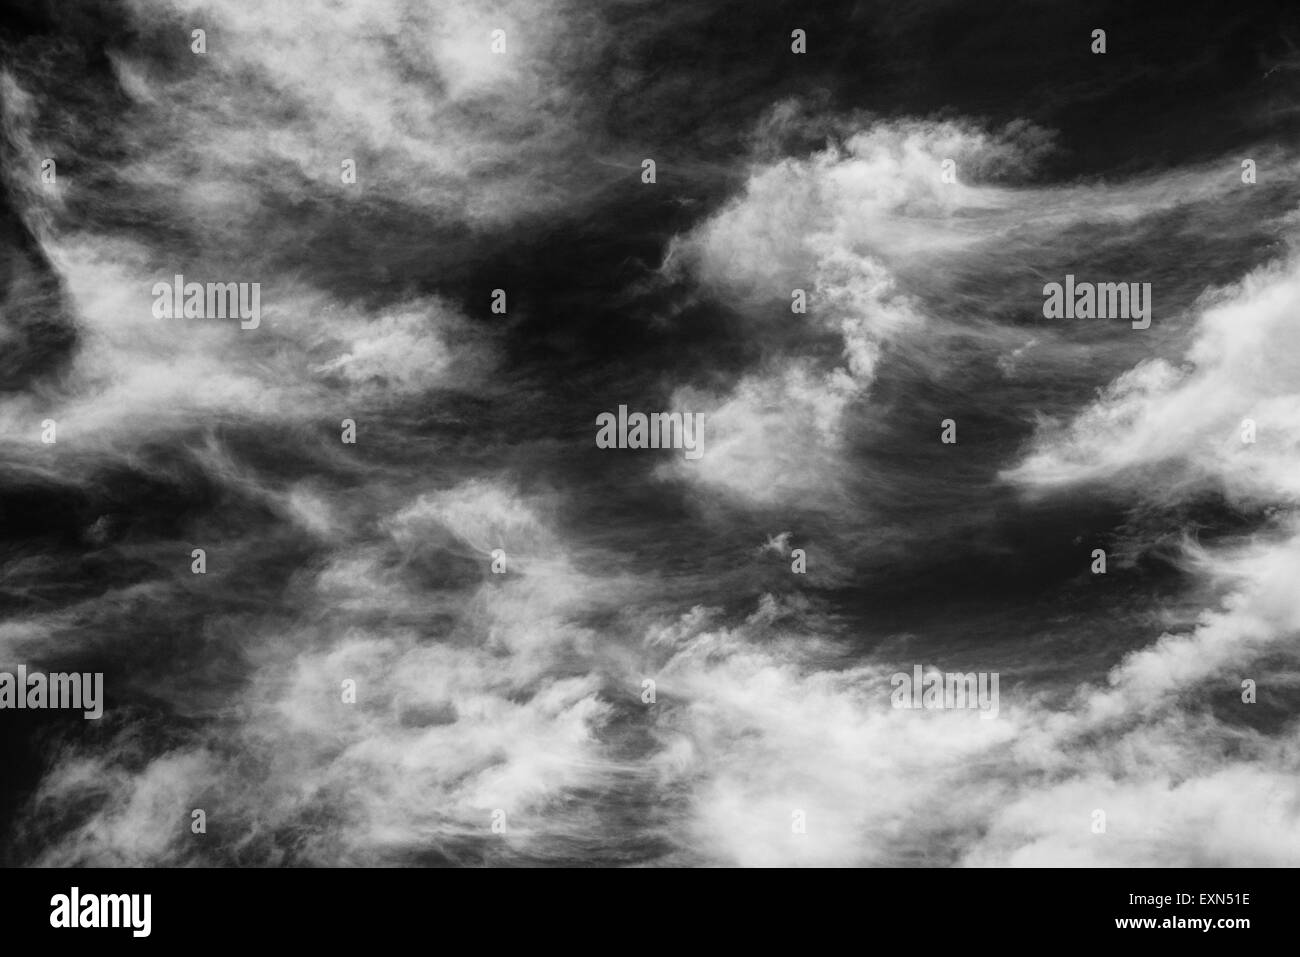 White clouds against a dark sky in monochrome picture. Stock Photo